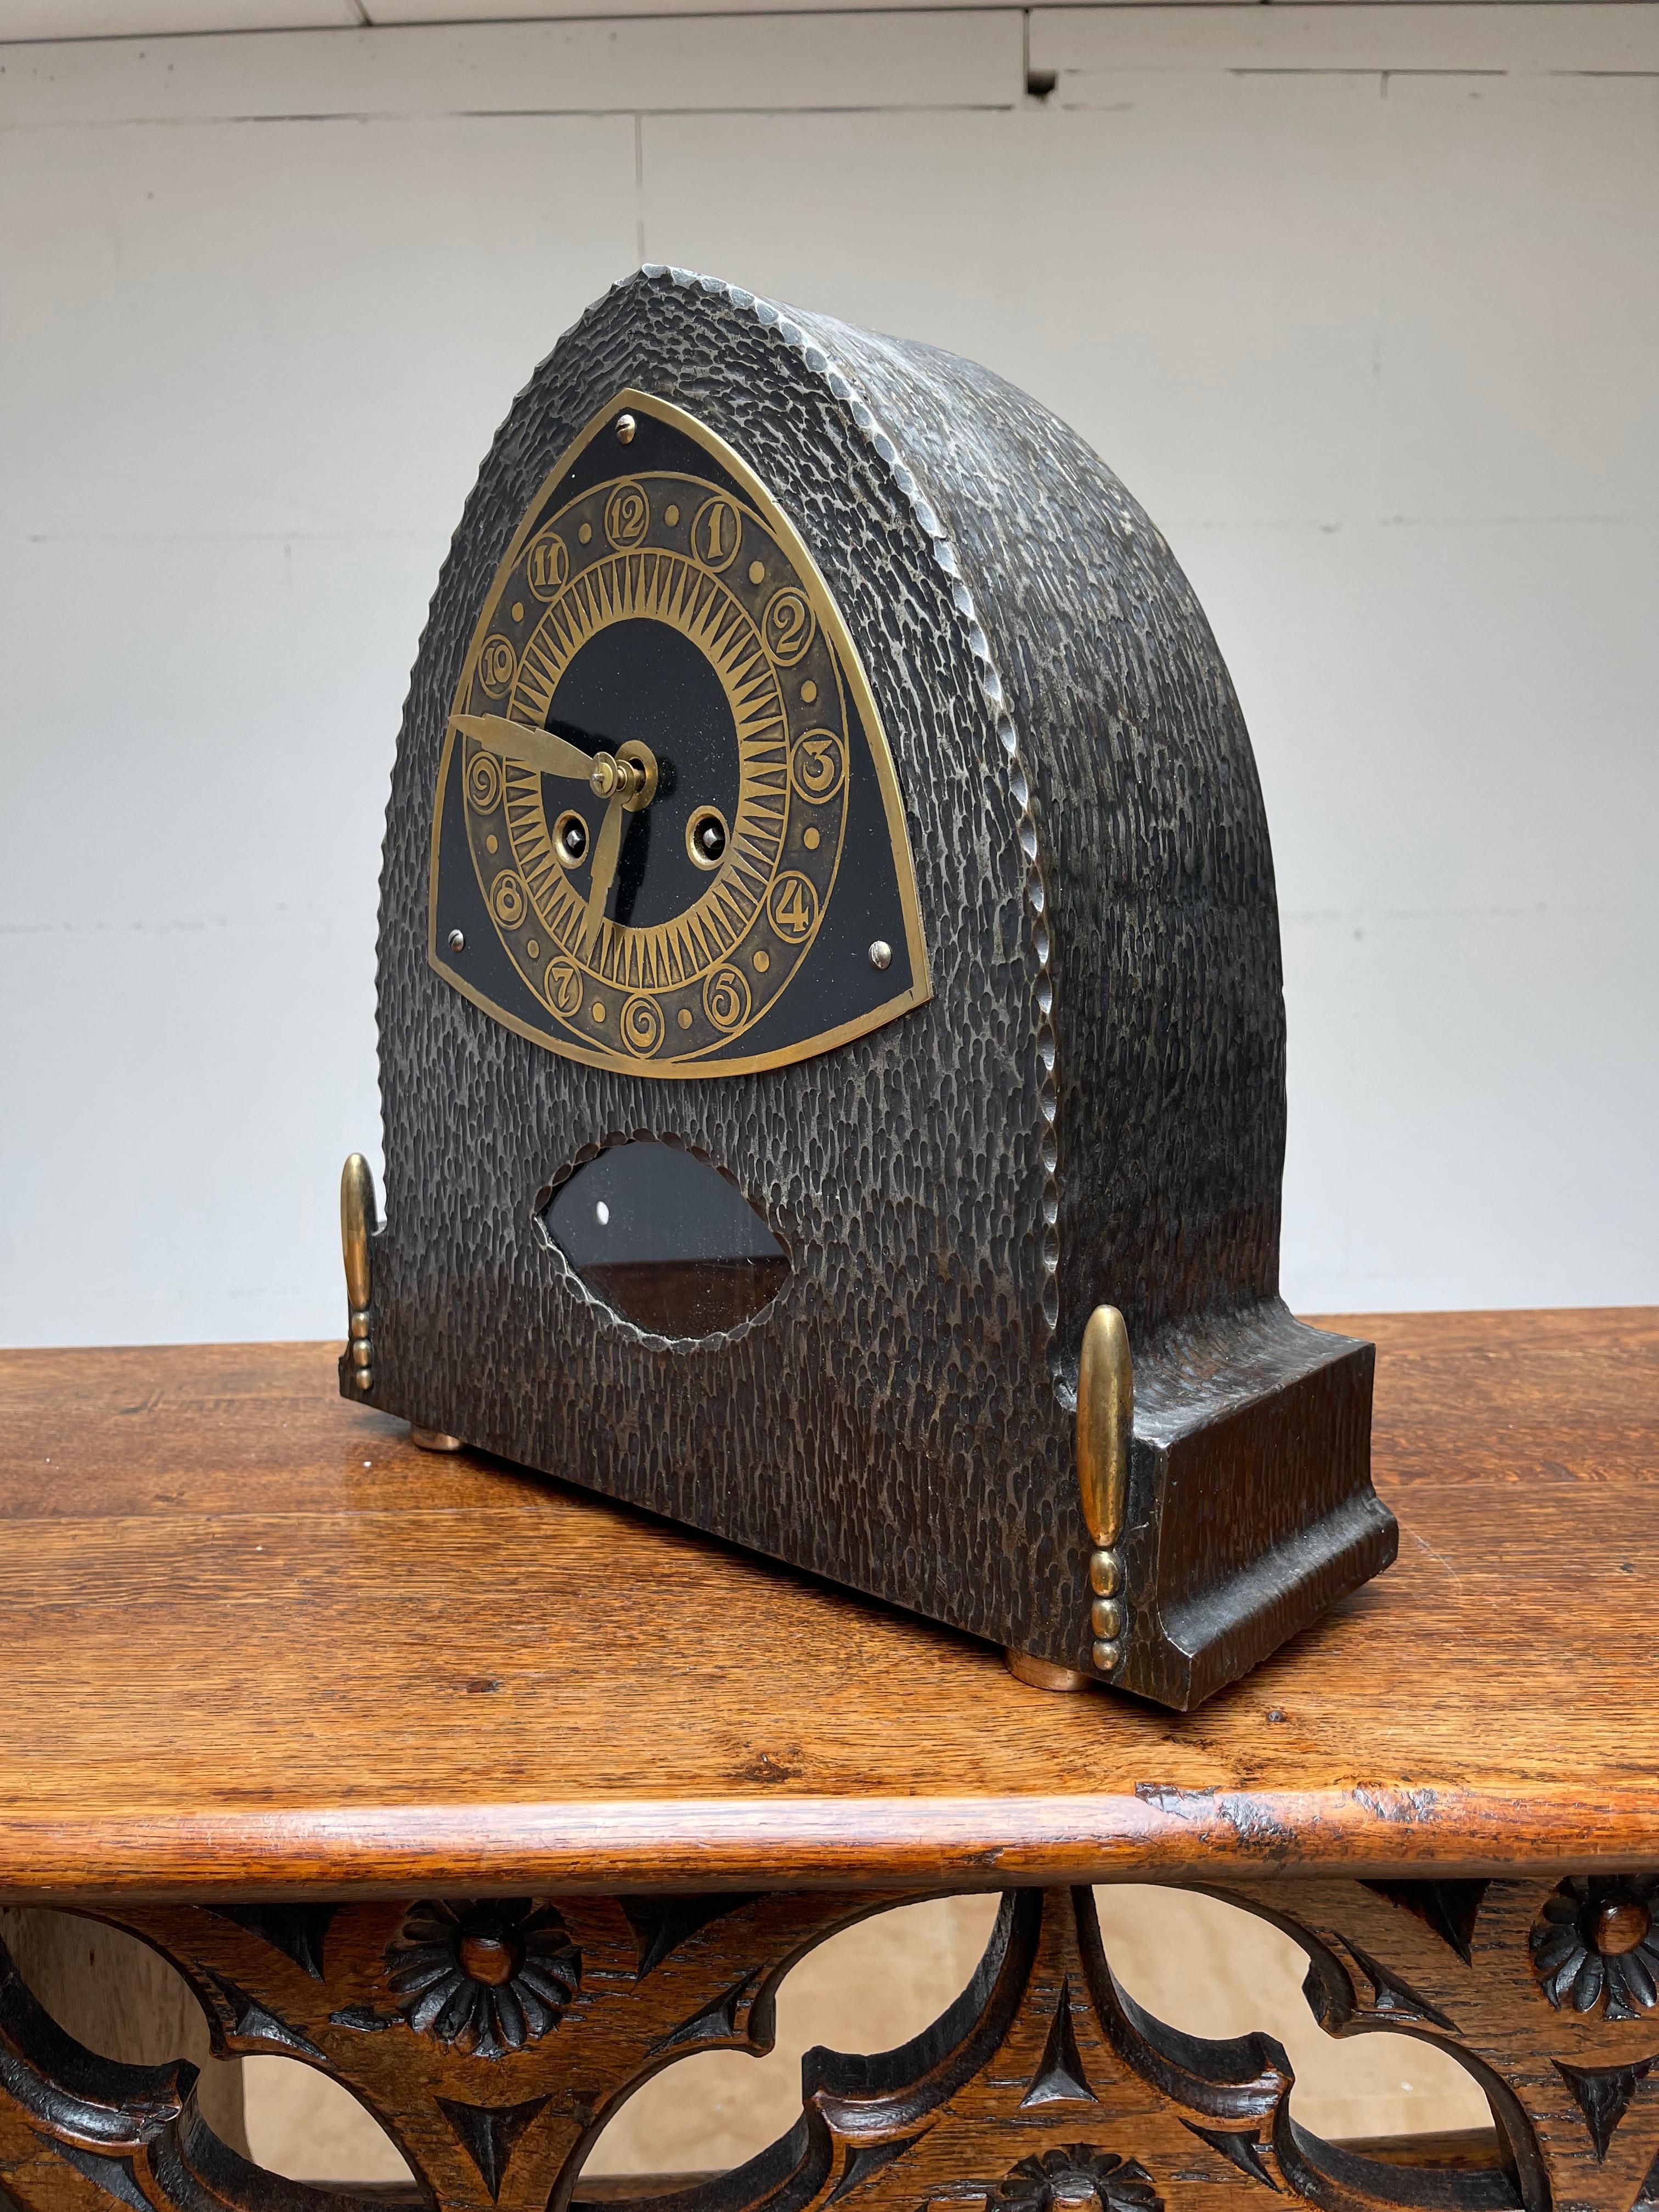 Beautiful and well working Arts & Crafts clock, stamped 'war materials'.

This German 'war time' (or interbellum) clock is another one of our recent unique finds. After WWI there was a shortage of all kinds of materials and people (including